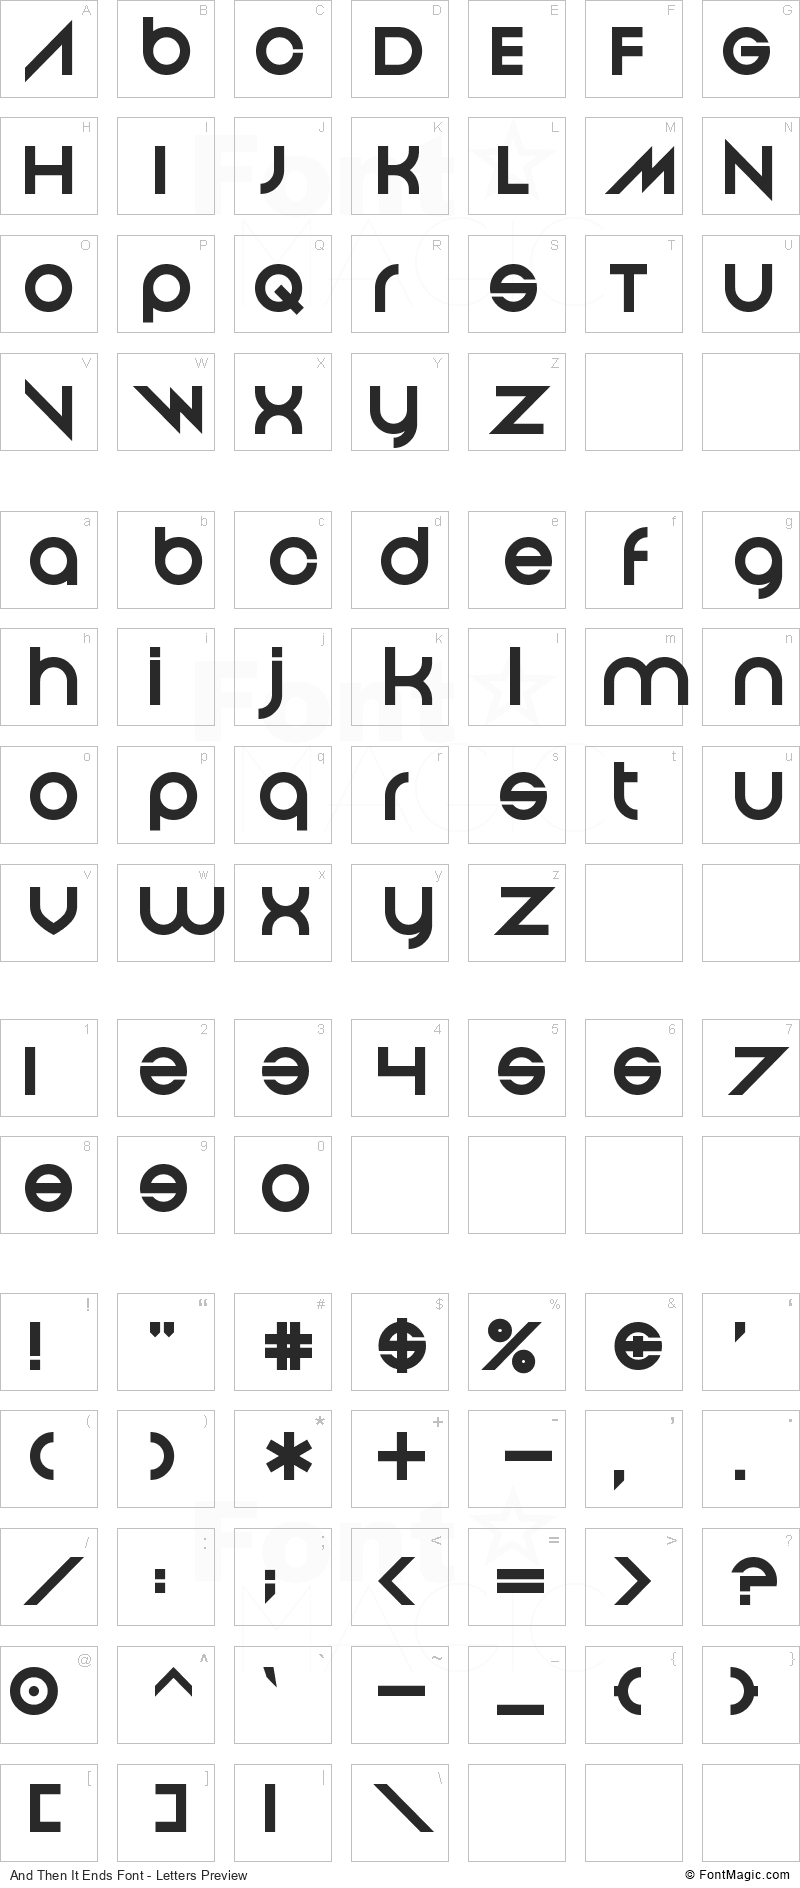 And Then It Ends Font - All Latters Preview Chart